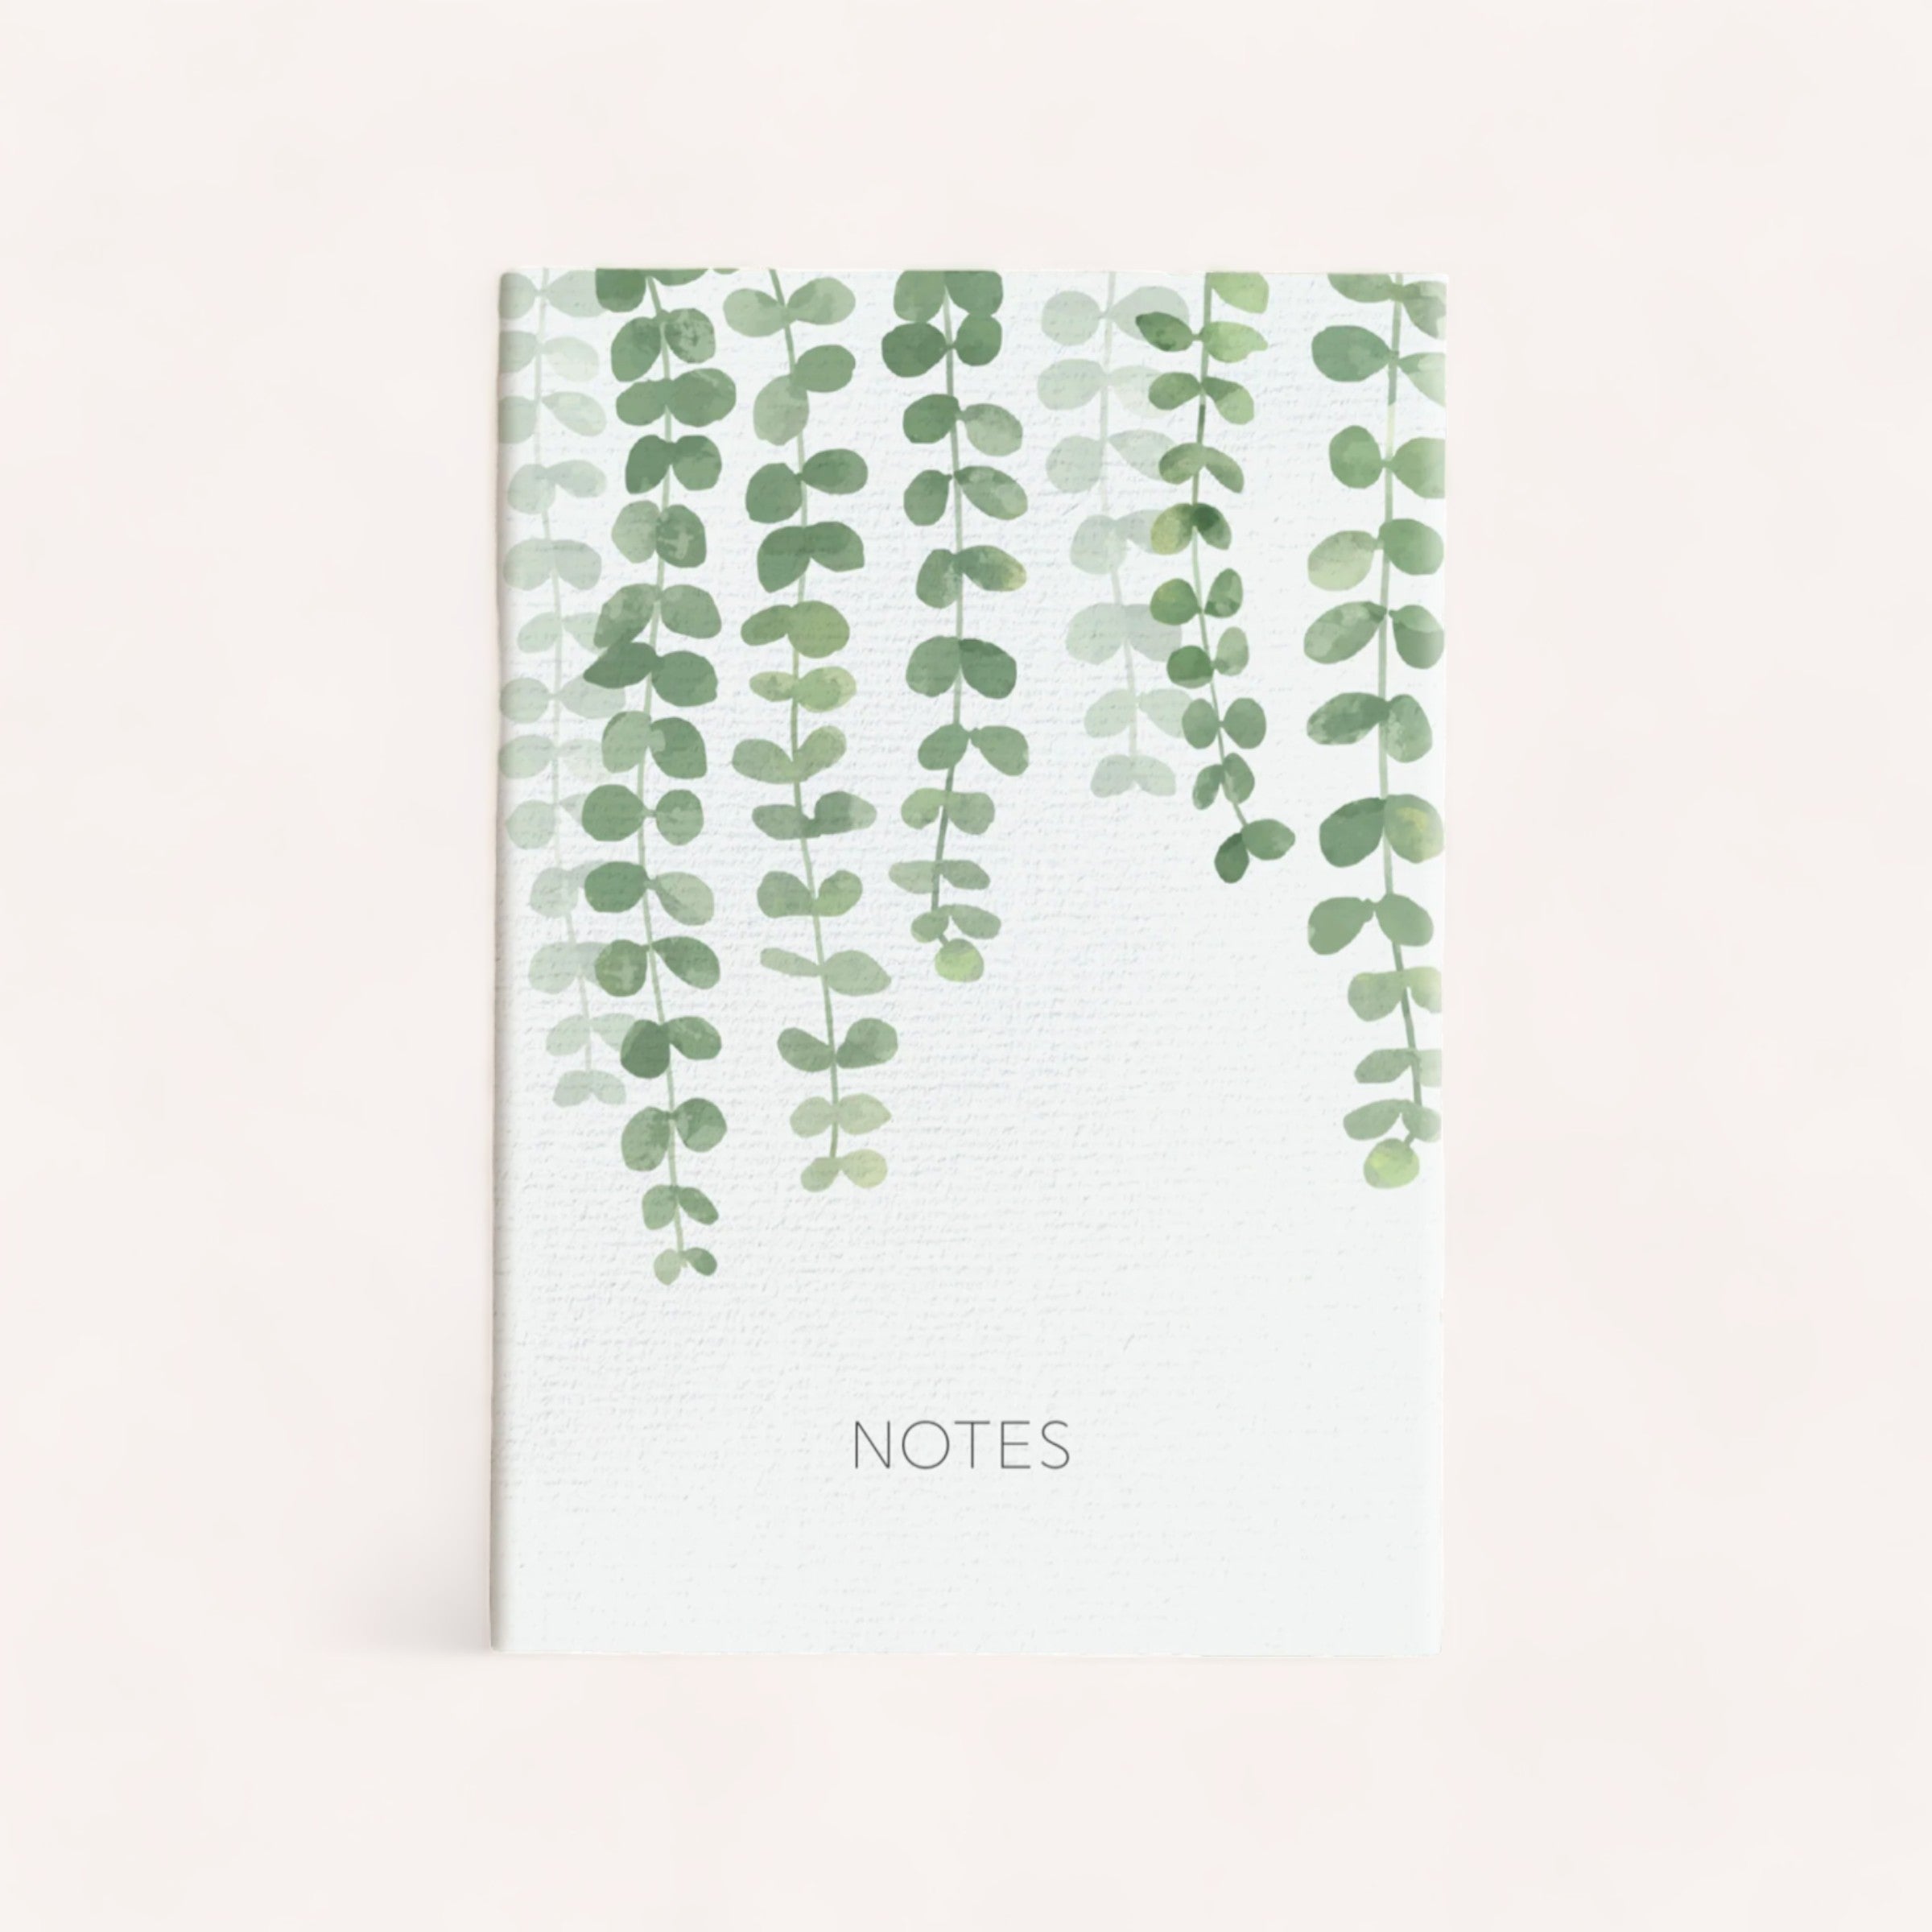 A serene, unlined Leaf Notebook with a botanical design featuring cascading green leaves on a clean, white background by Ink Bomb.